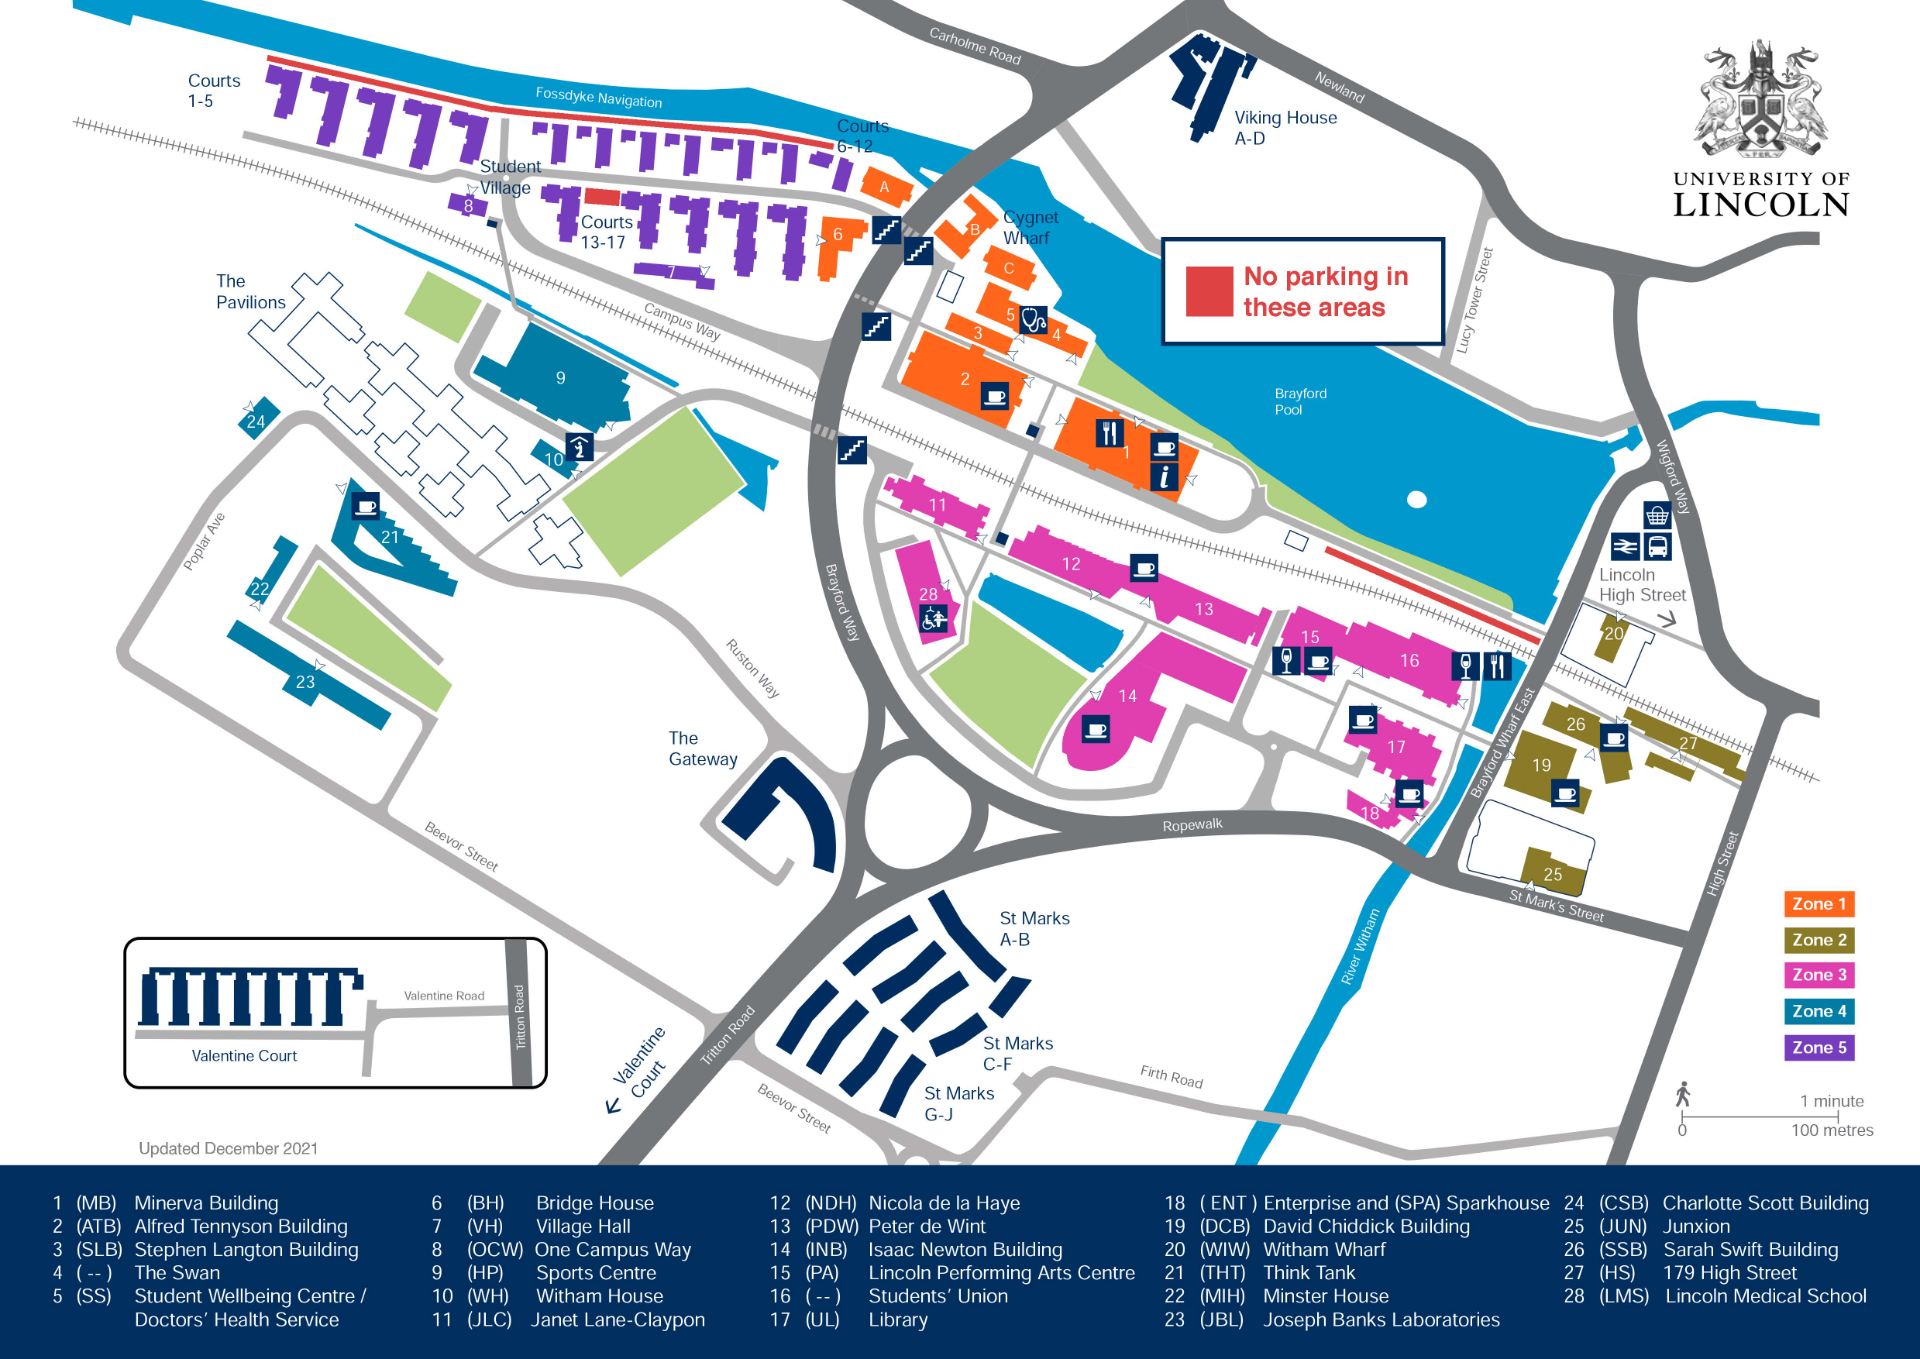 Image of a campus map showing red areas behind the courts accommodation at the Brayford.